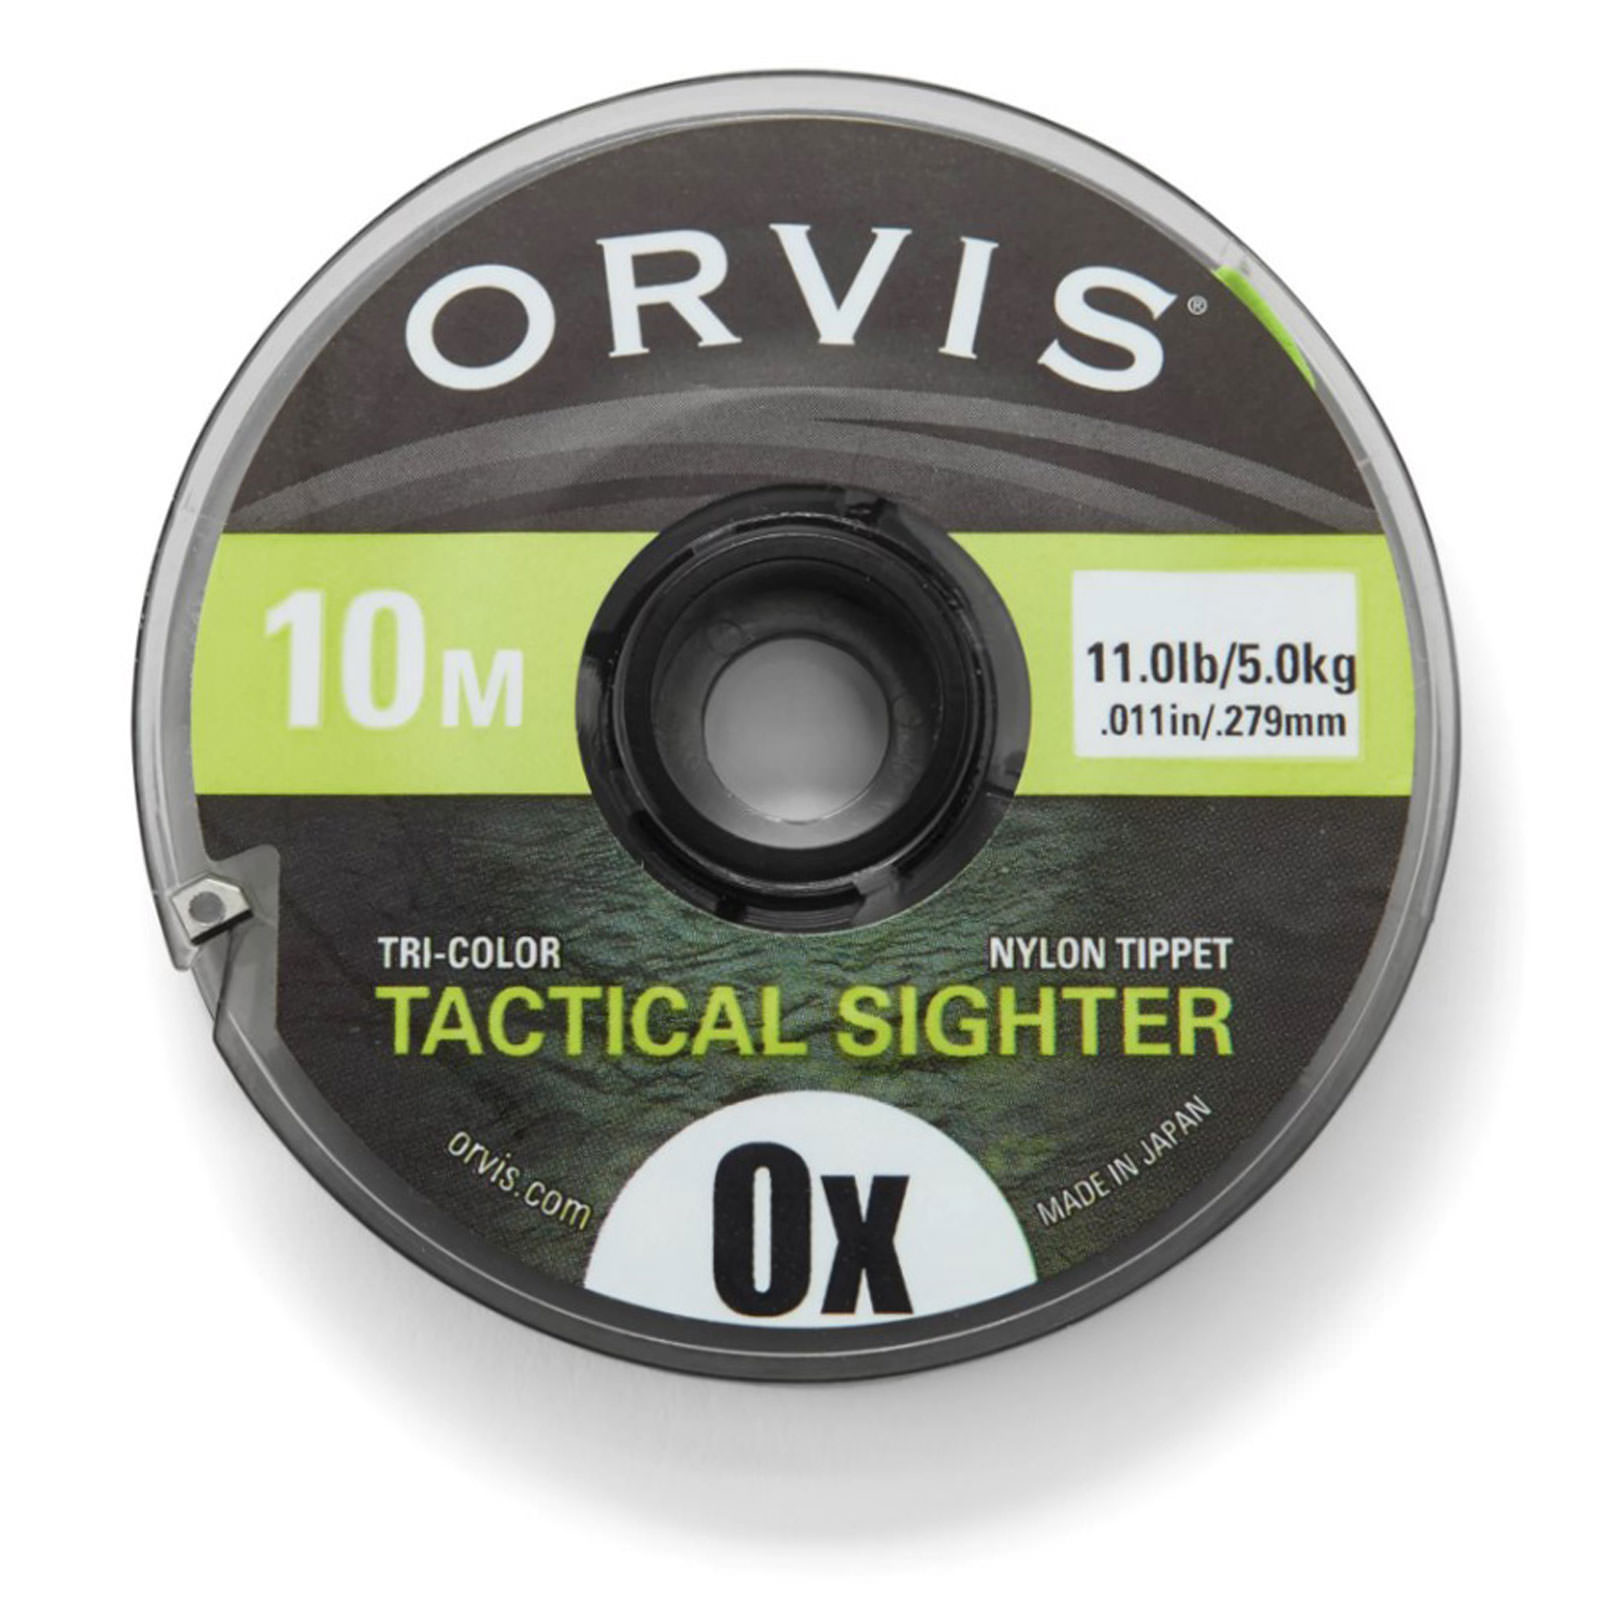 Orvis Tactical Sighter Tippet (0X)